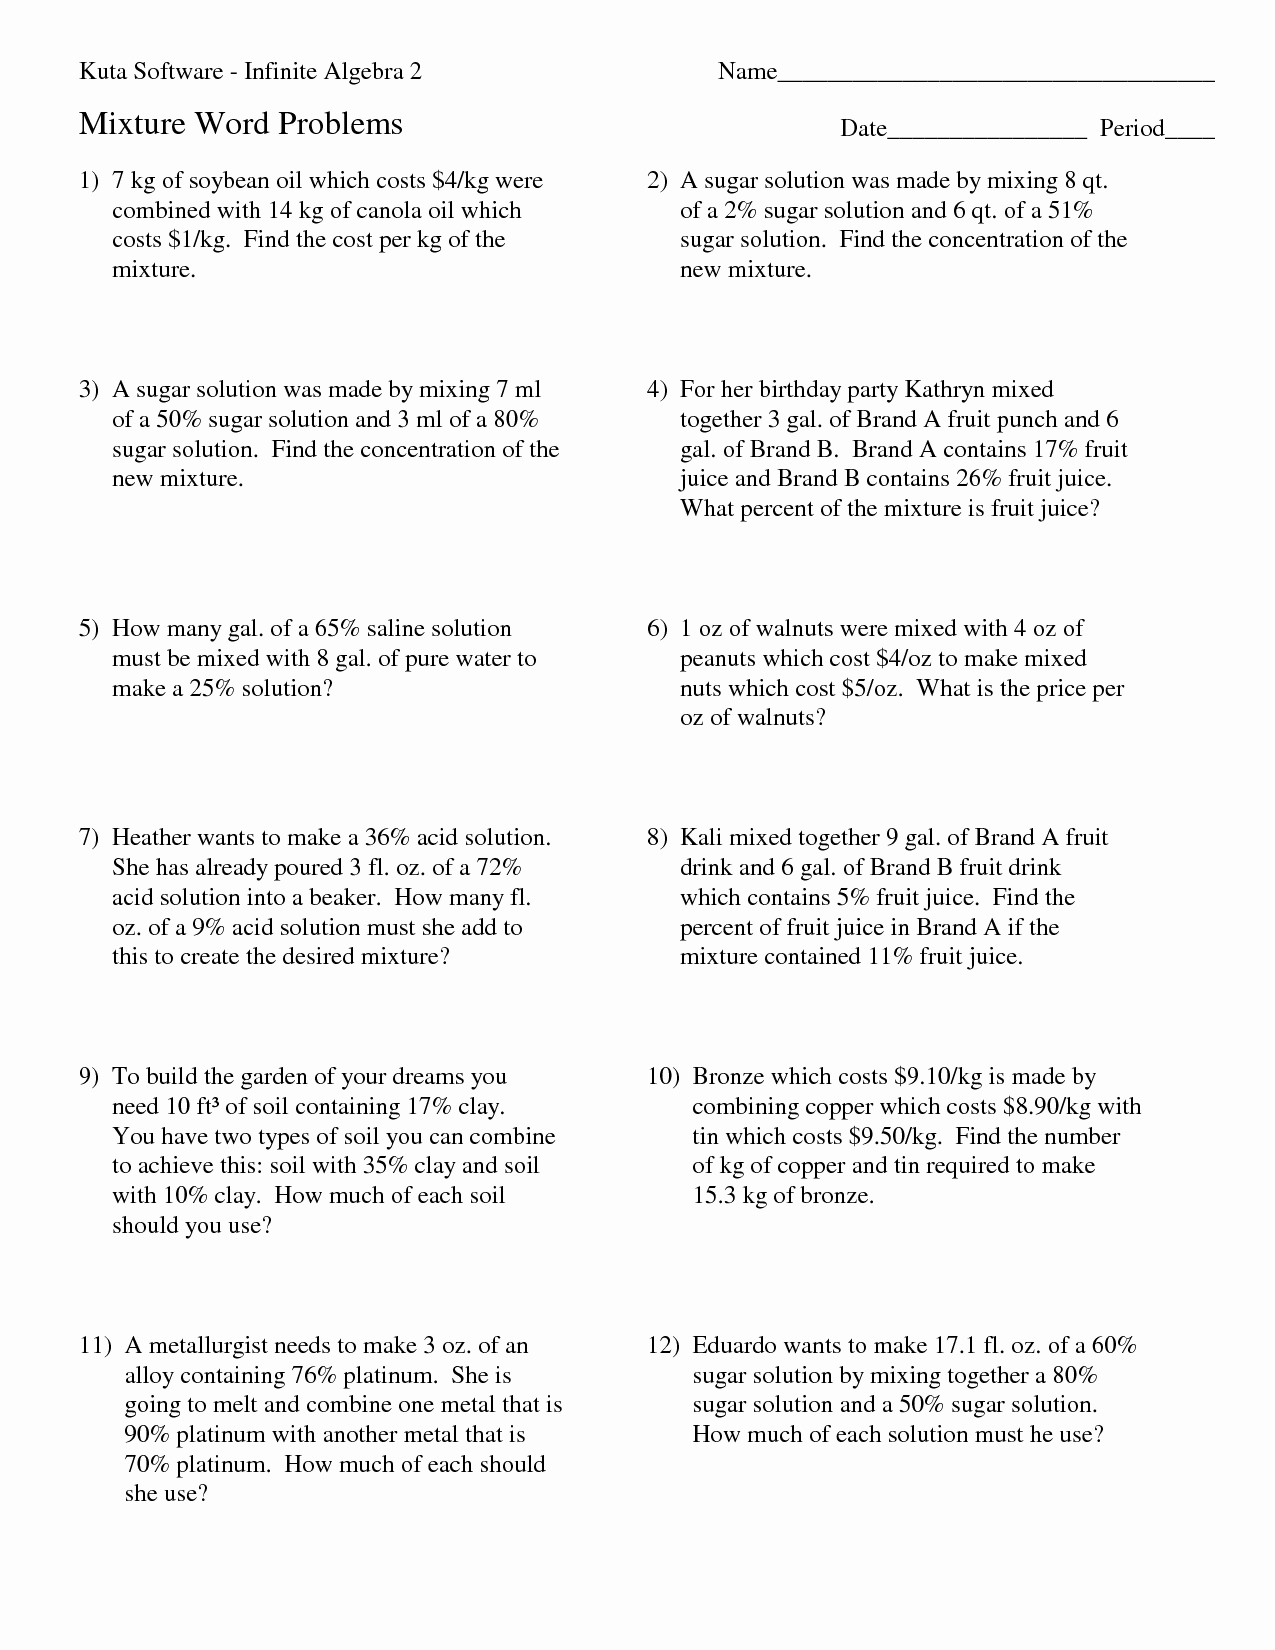 Problem and solution Worksheet Beautiful 7 Best Of Mixtures and solutions Worksheets